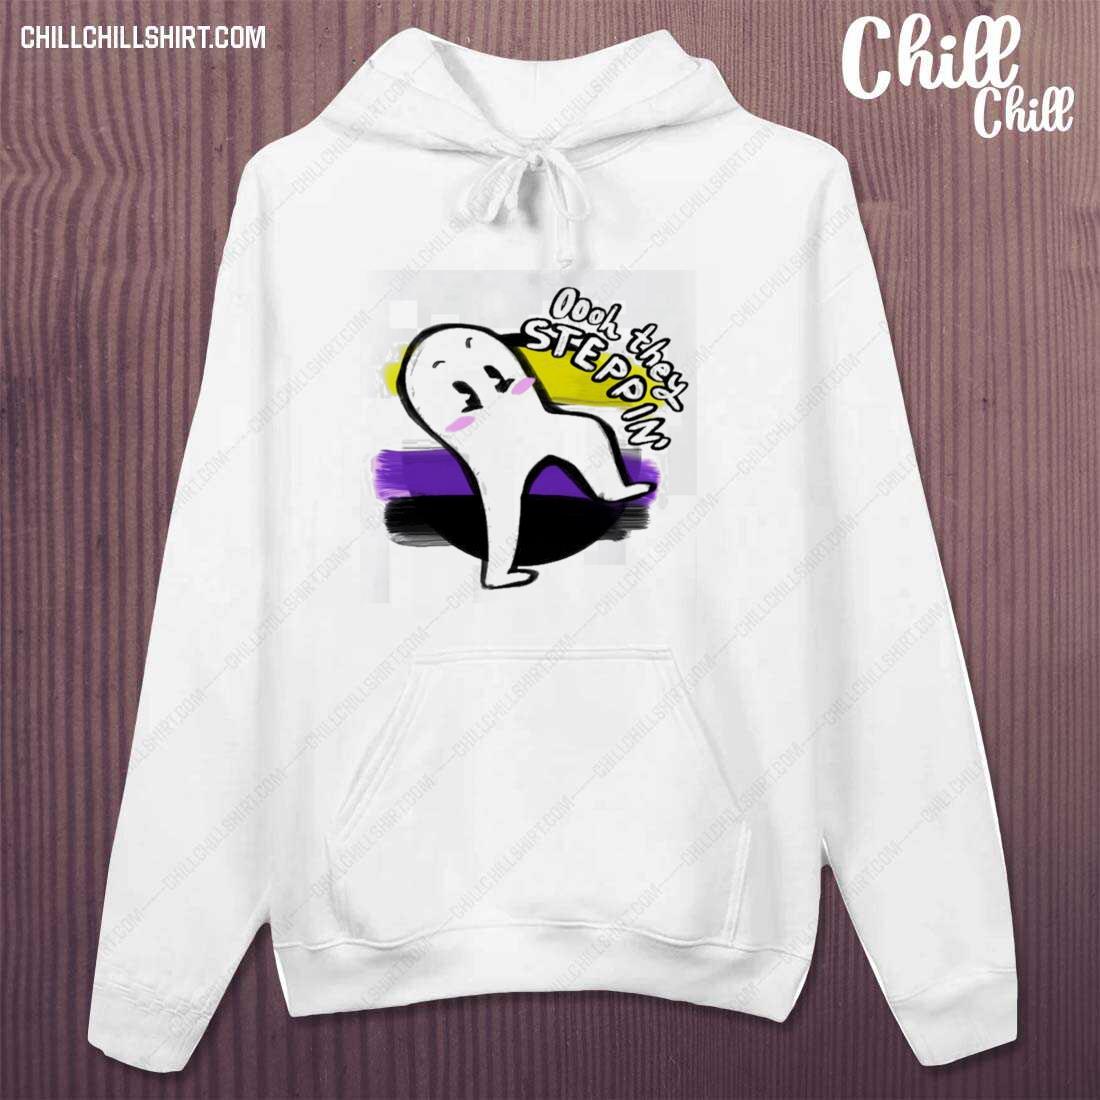 Official oooh They Steppin’ Nightcrawler T-s hoodie